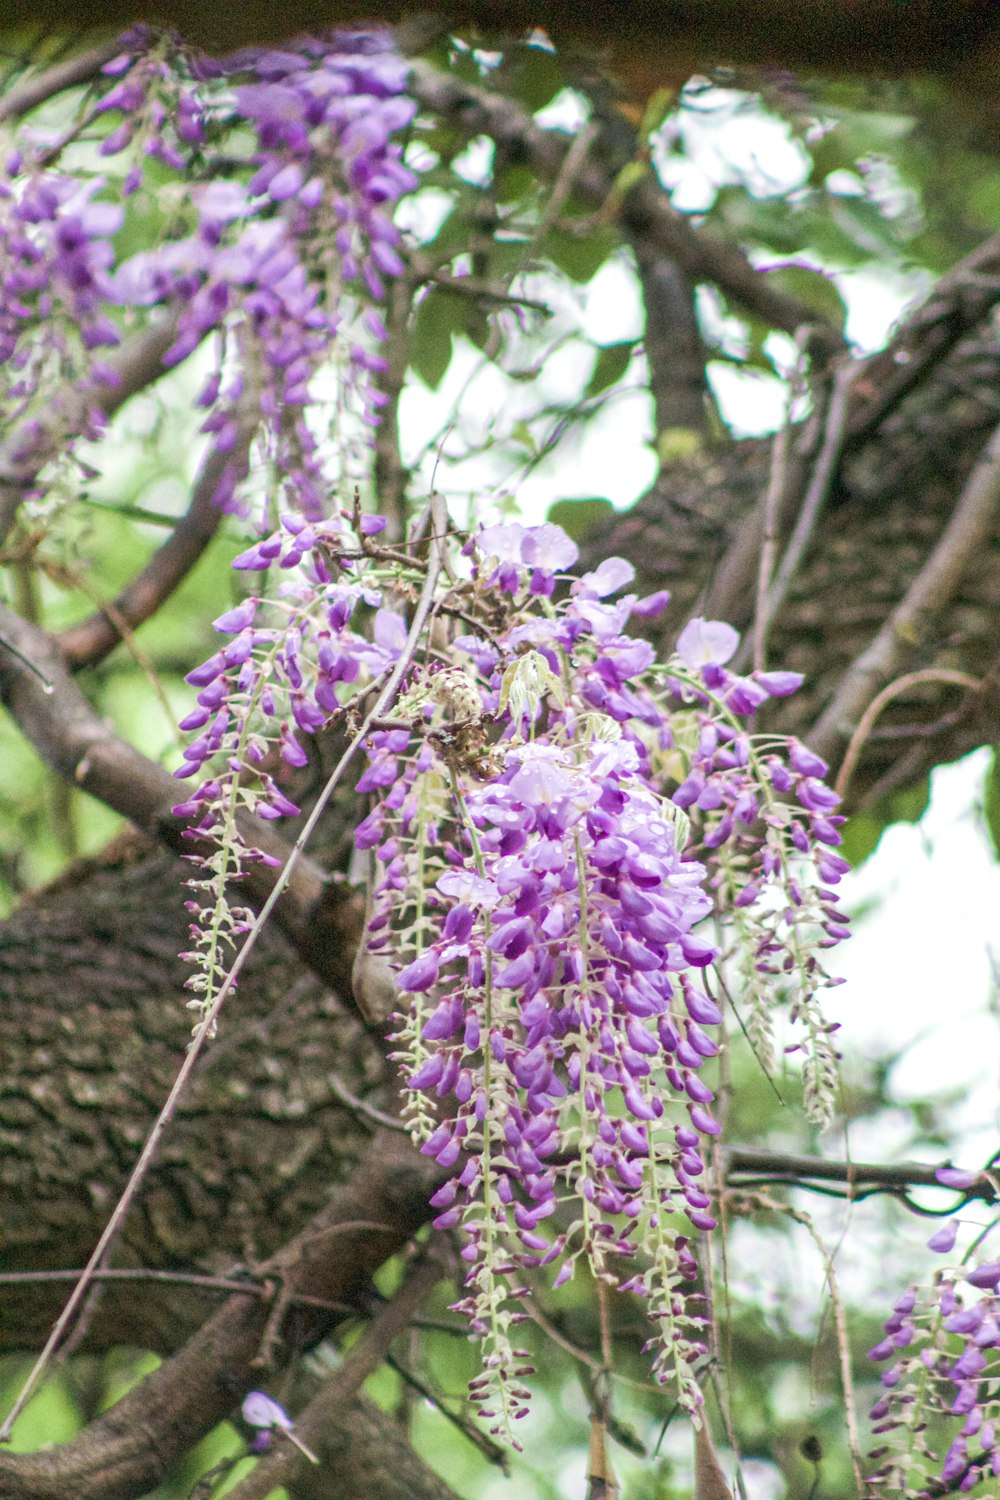 a tree with purple flowers hanging from it's branches